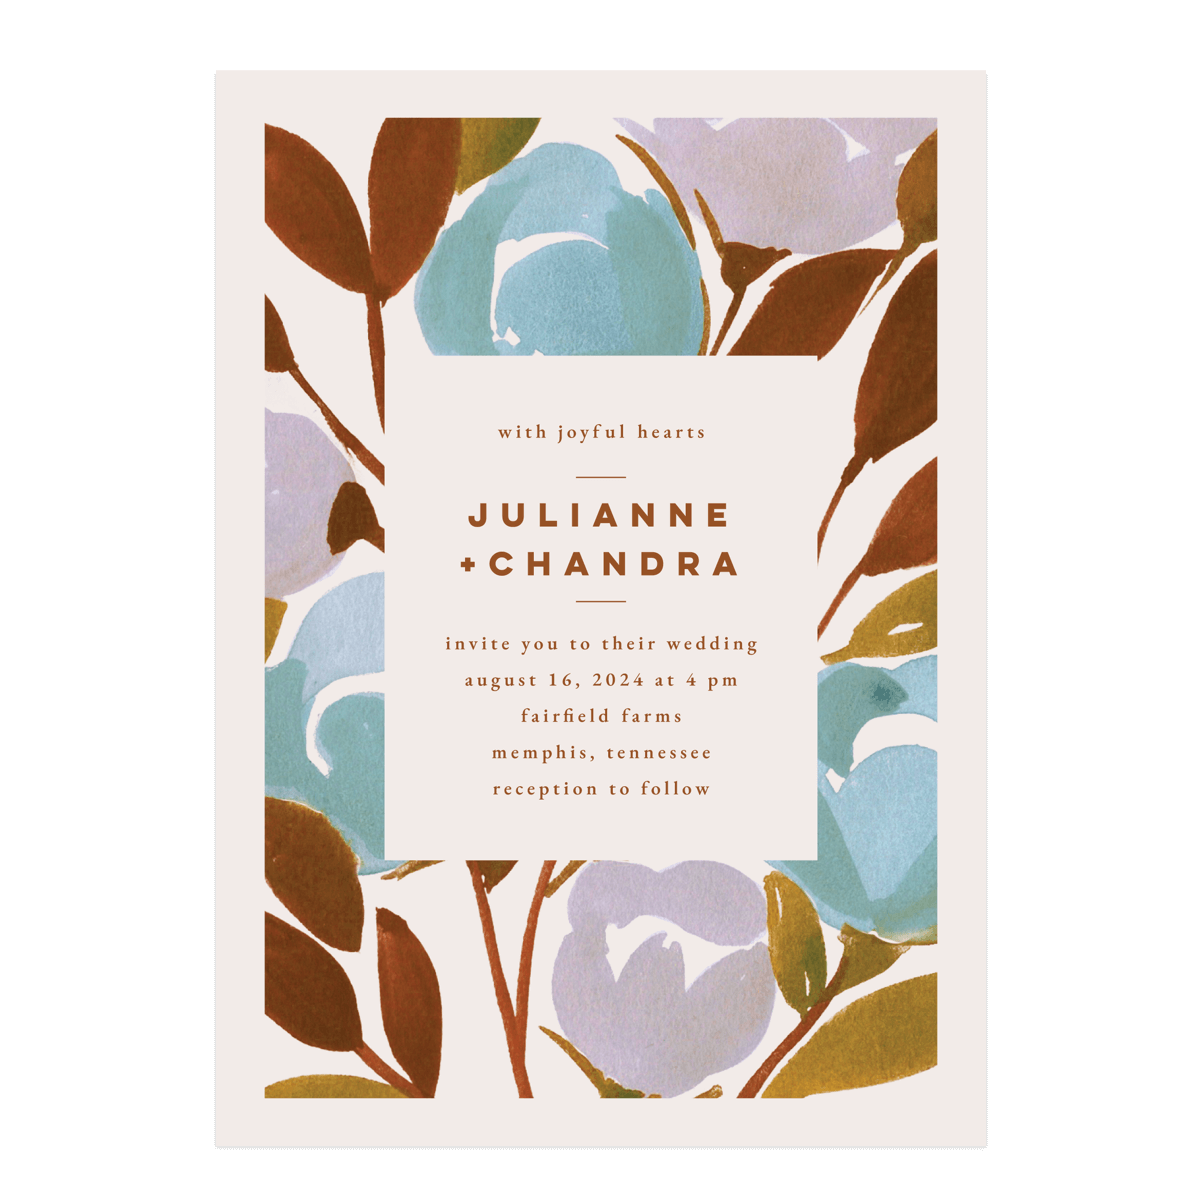 A Wedding Invitation from the Modern Floral Collection